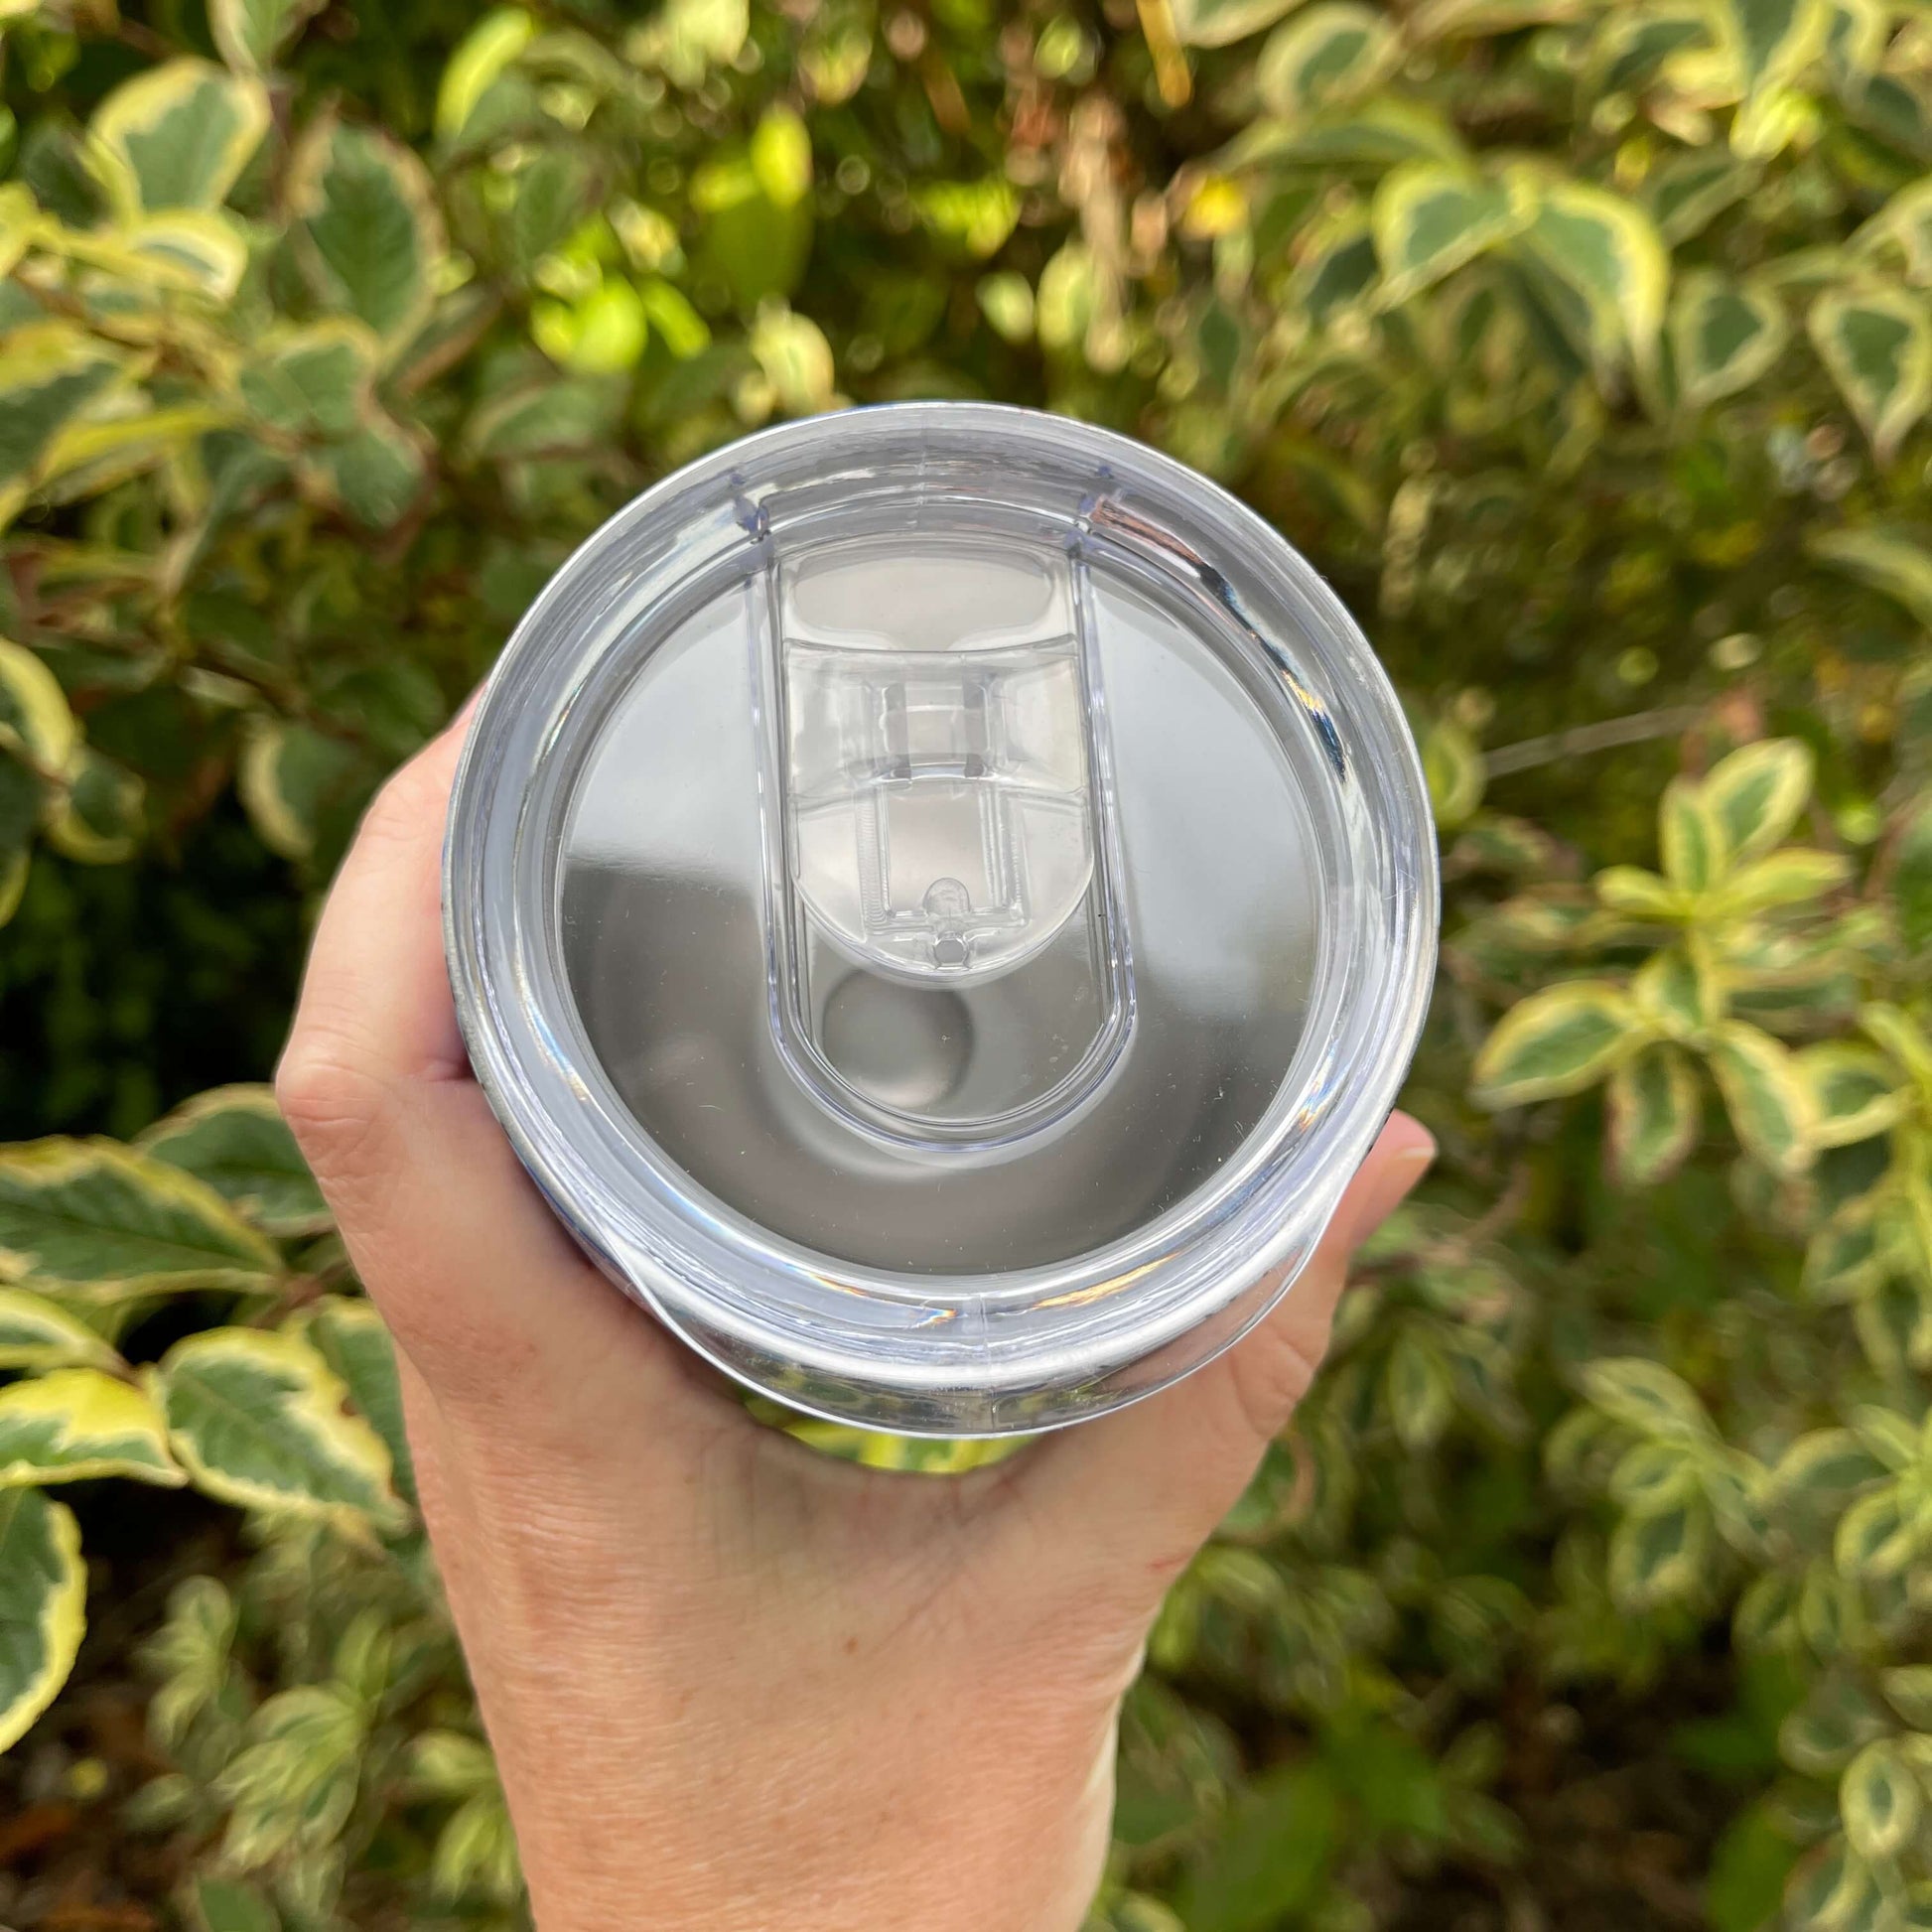 Birds eye view of the top of a reusable coffee mug showing the clear plastic lid.